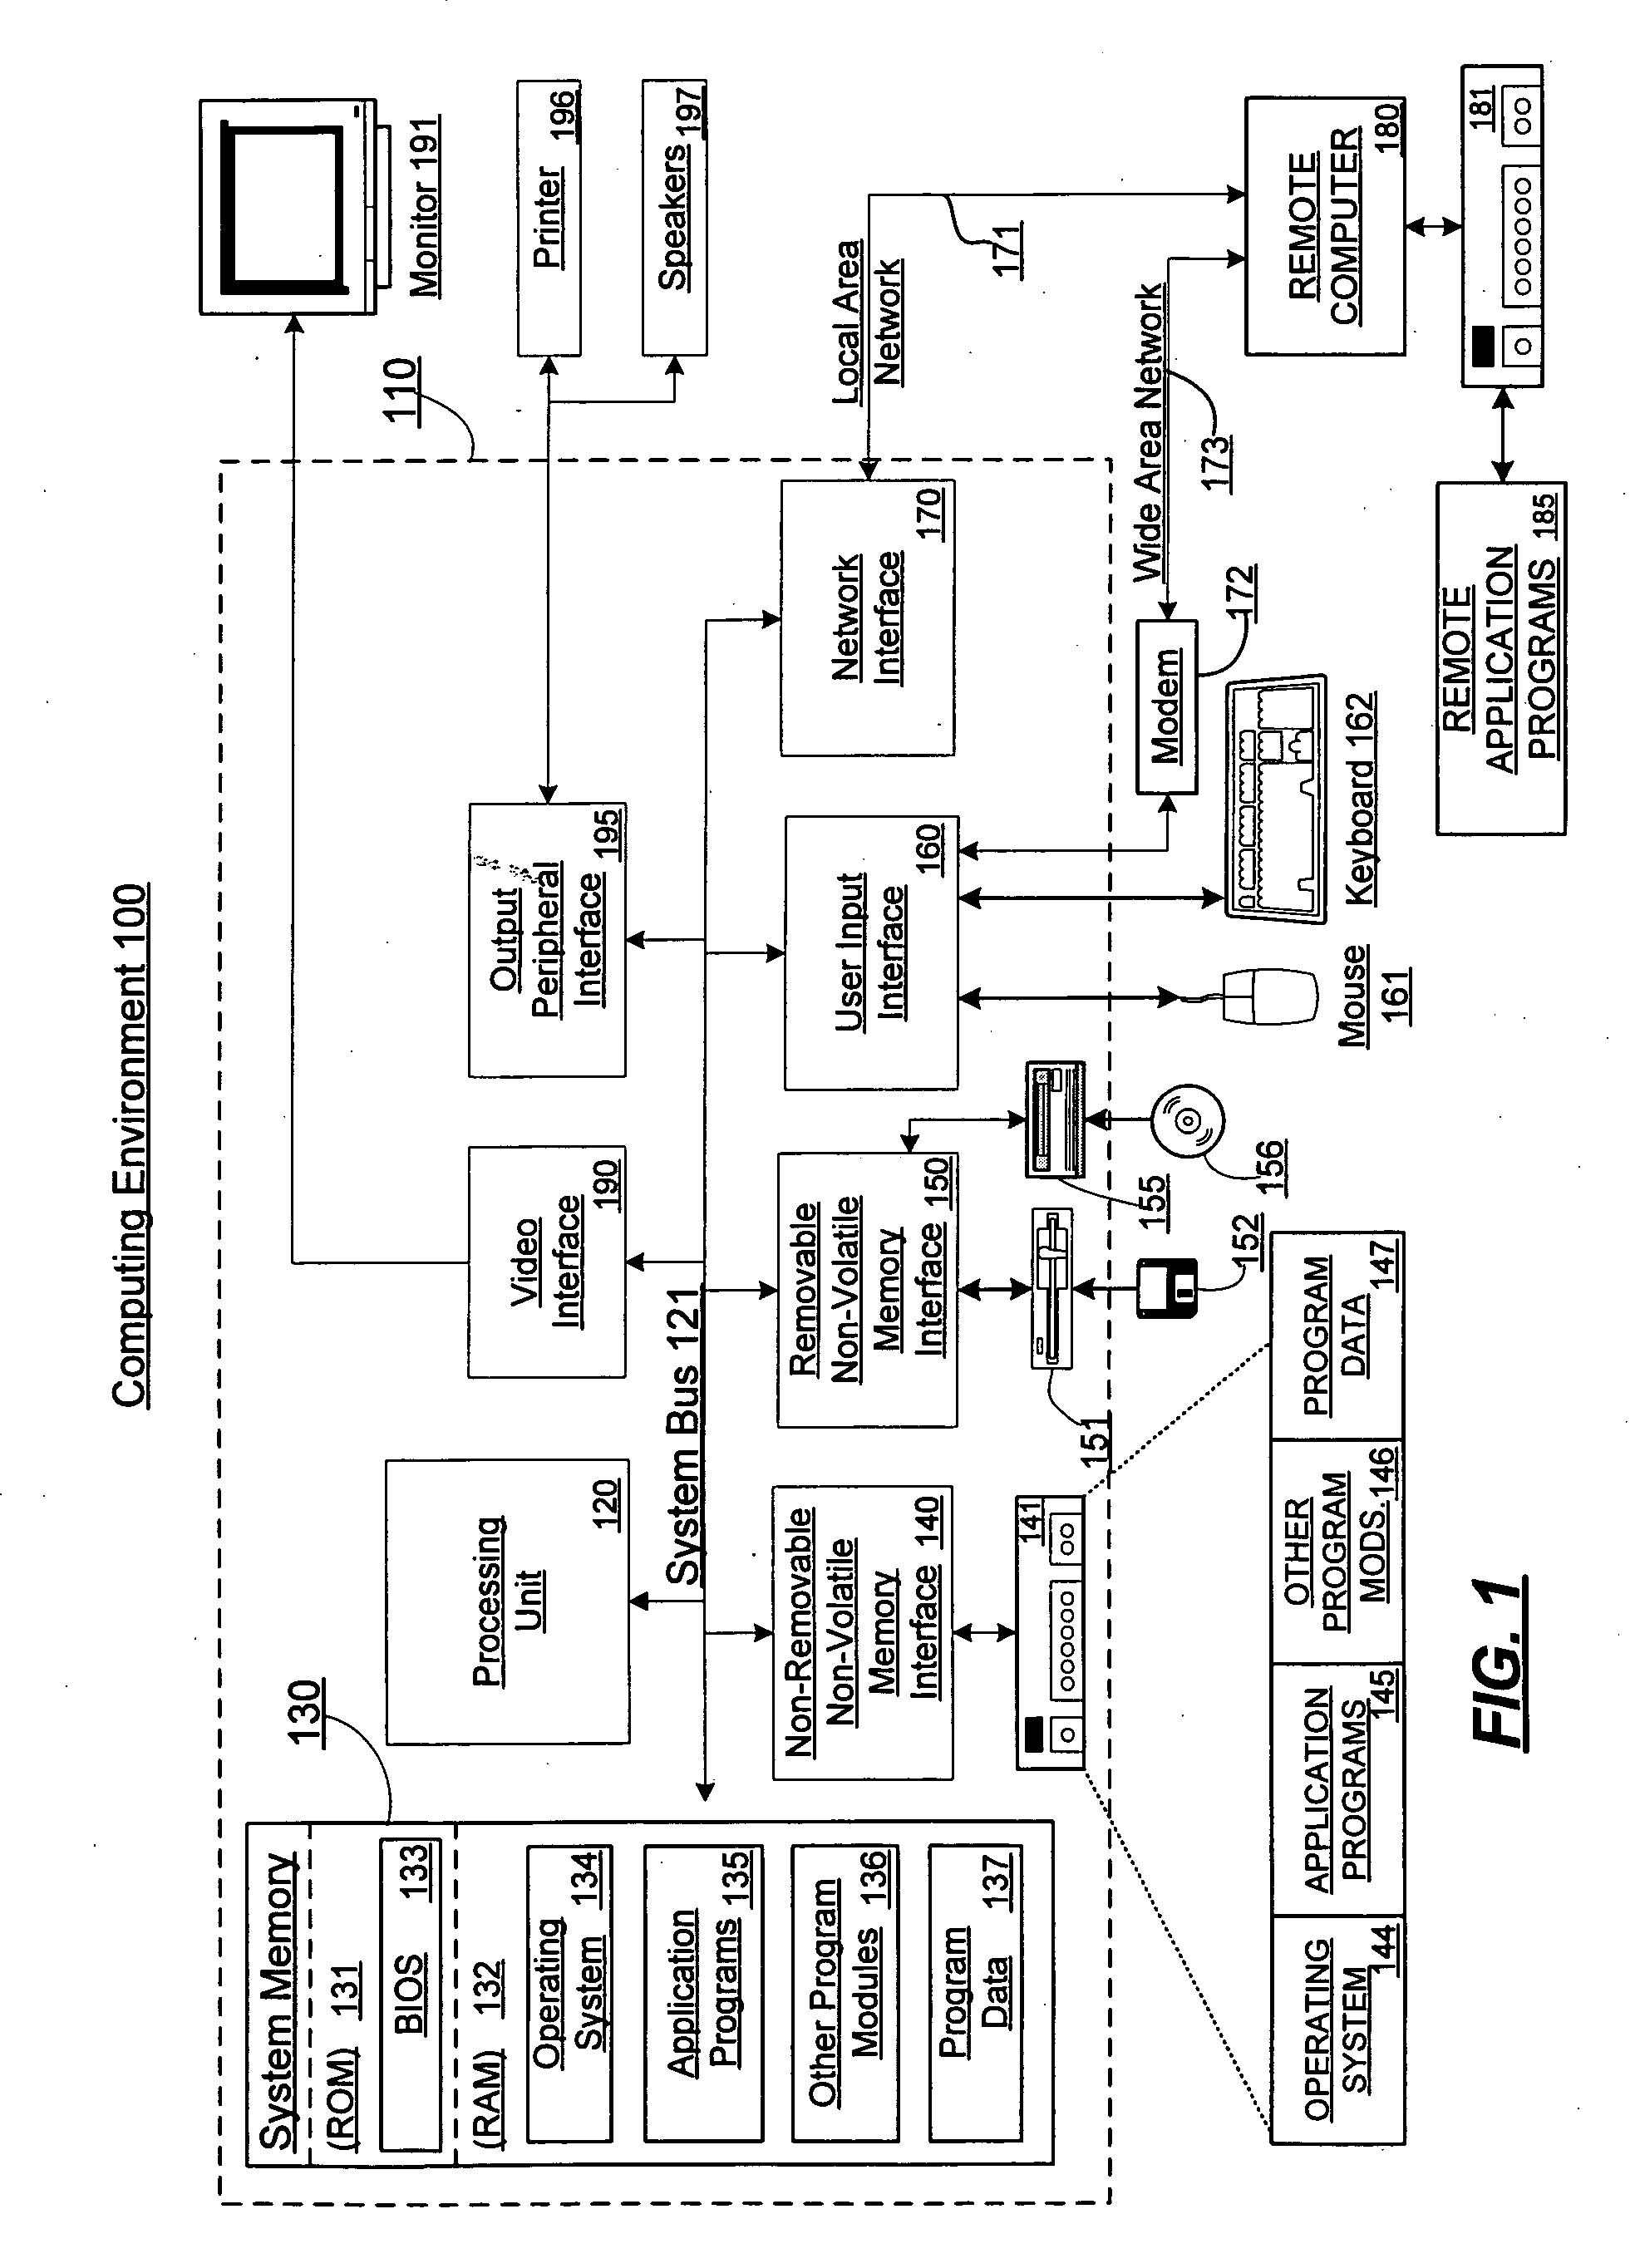 System and method for protected operating system boot using state validation